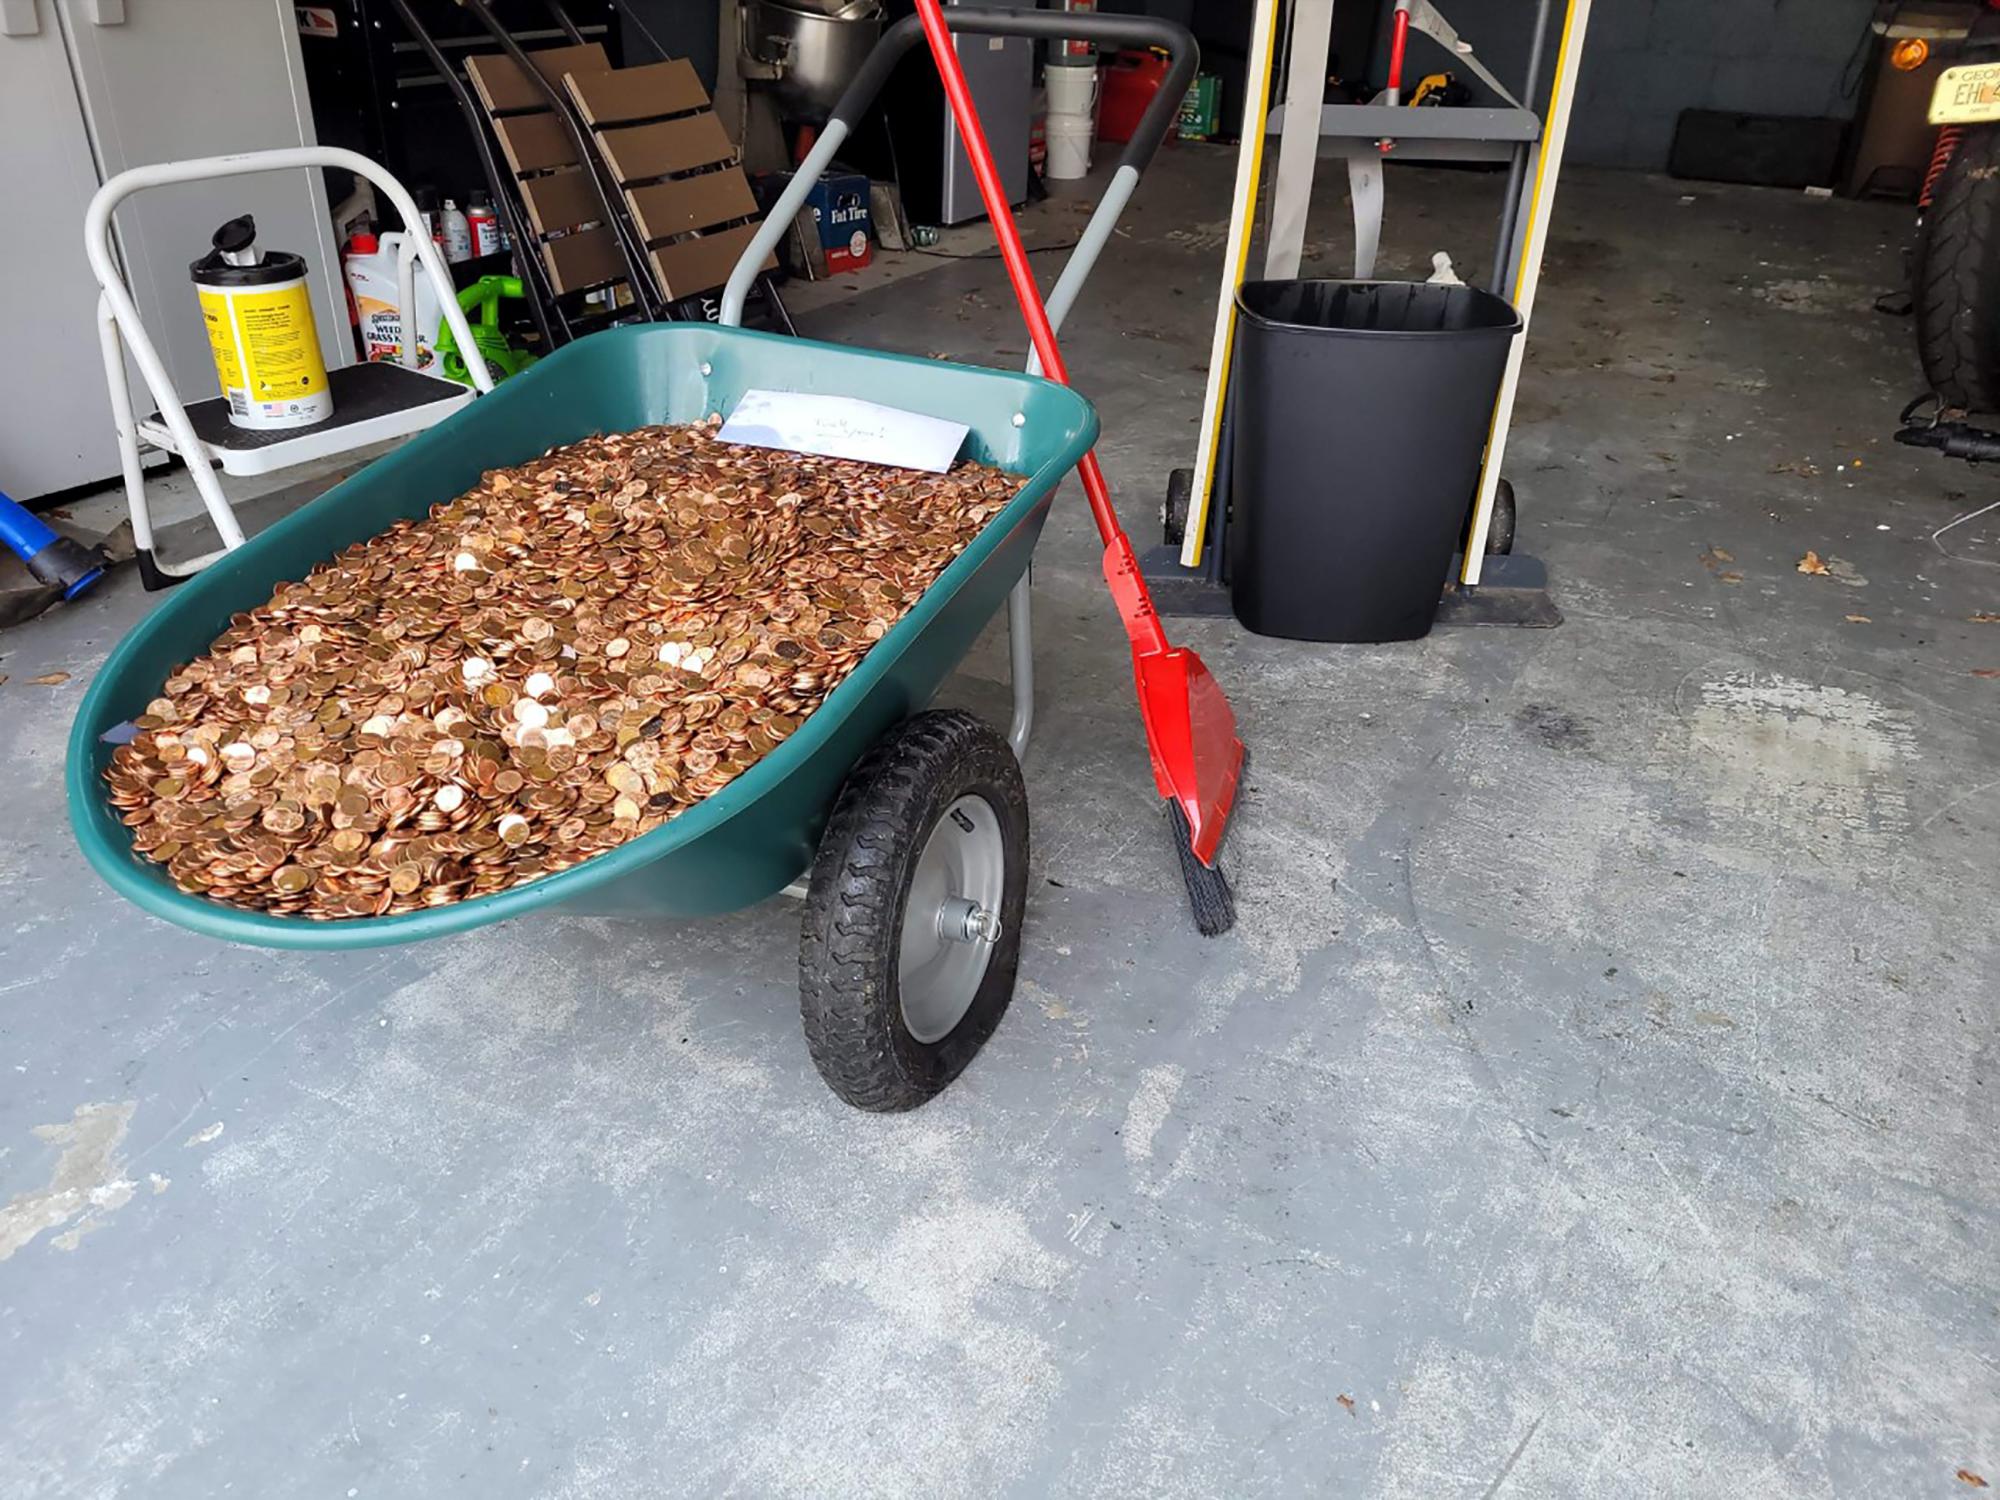 The man gets paid in pennies from the dollar